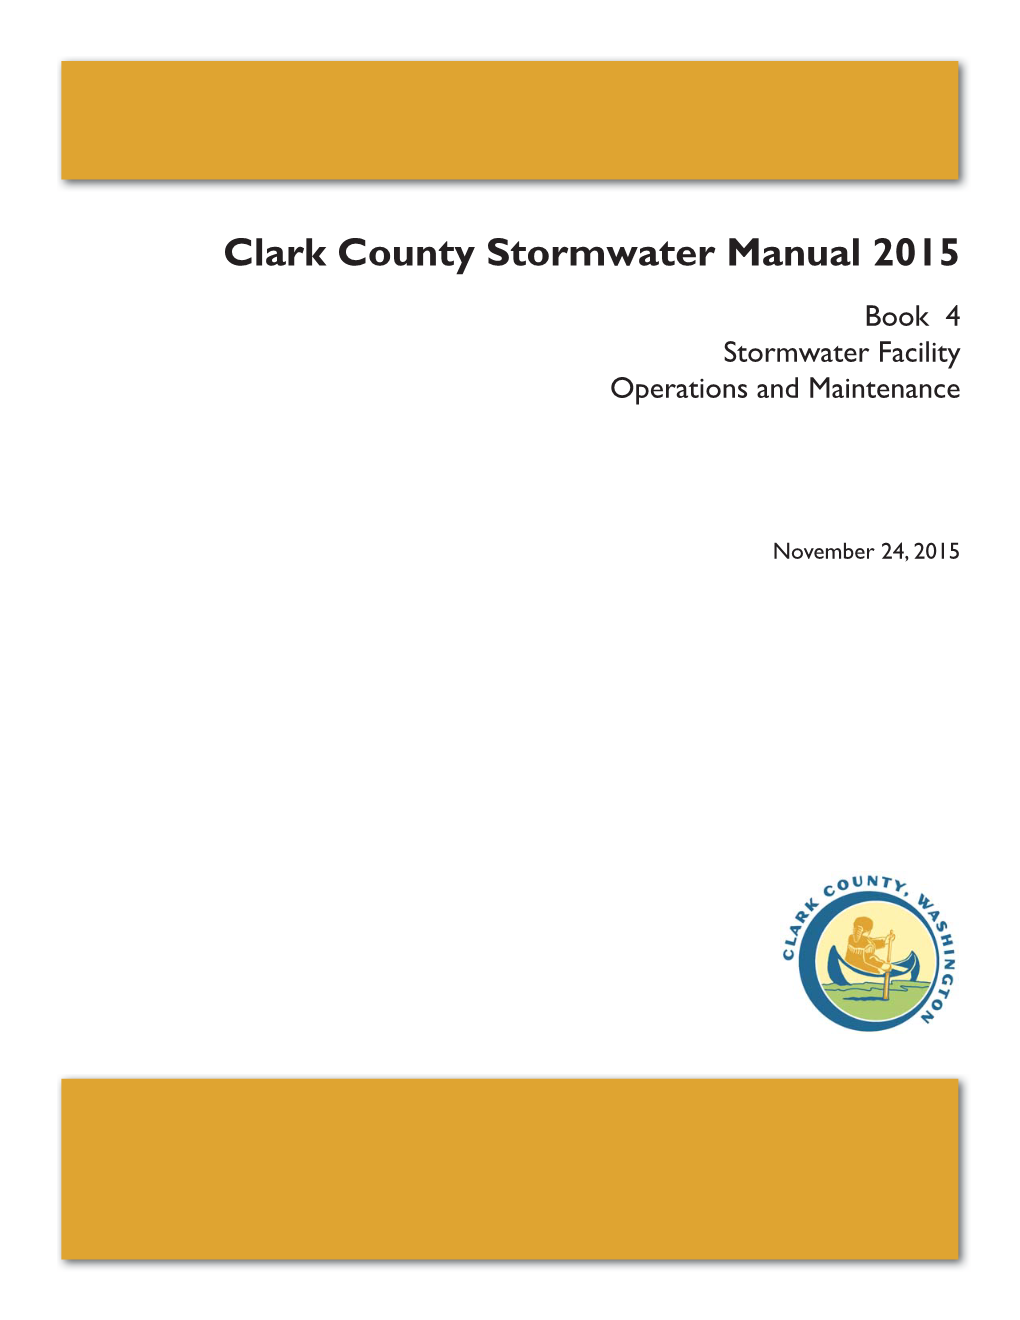 Clark County Stormwater Manual 2015, Book 4